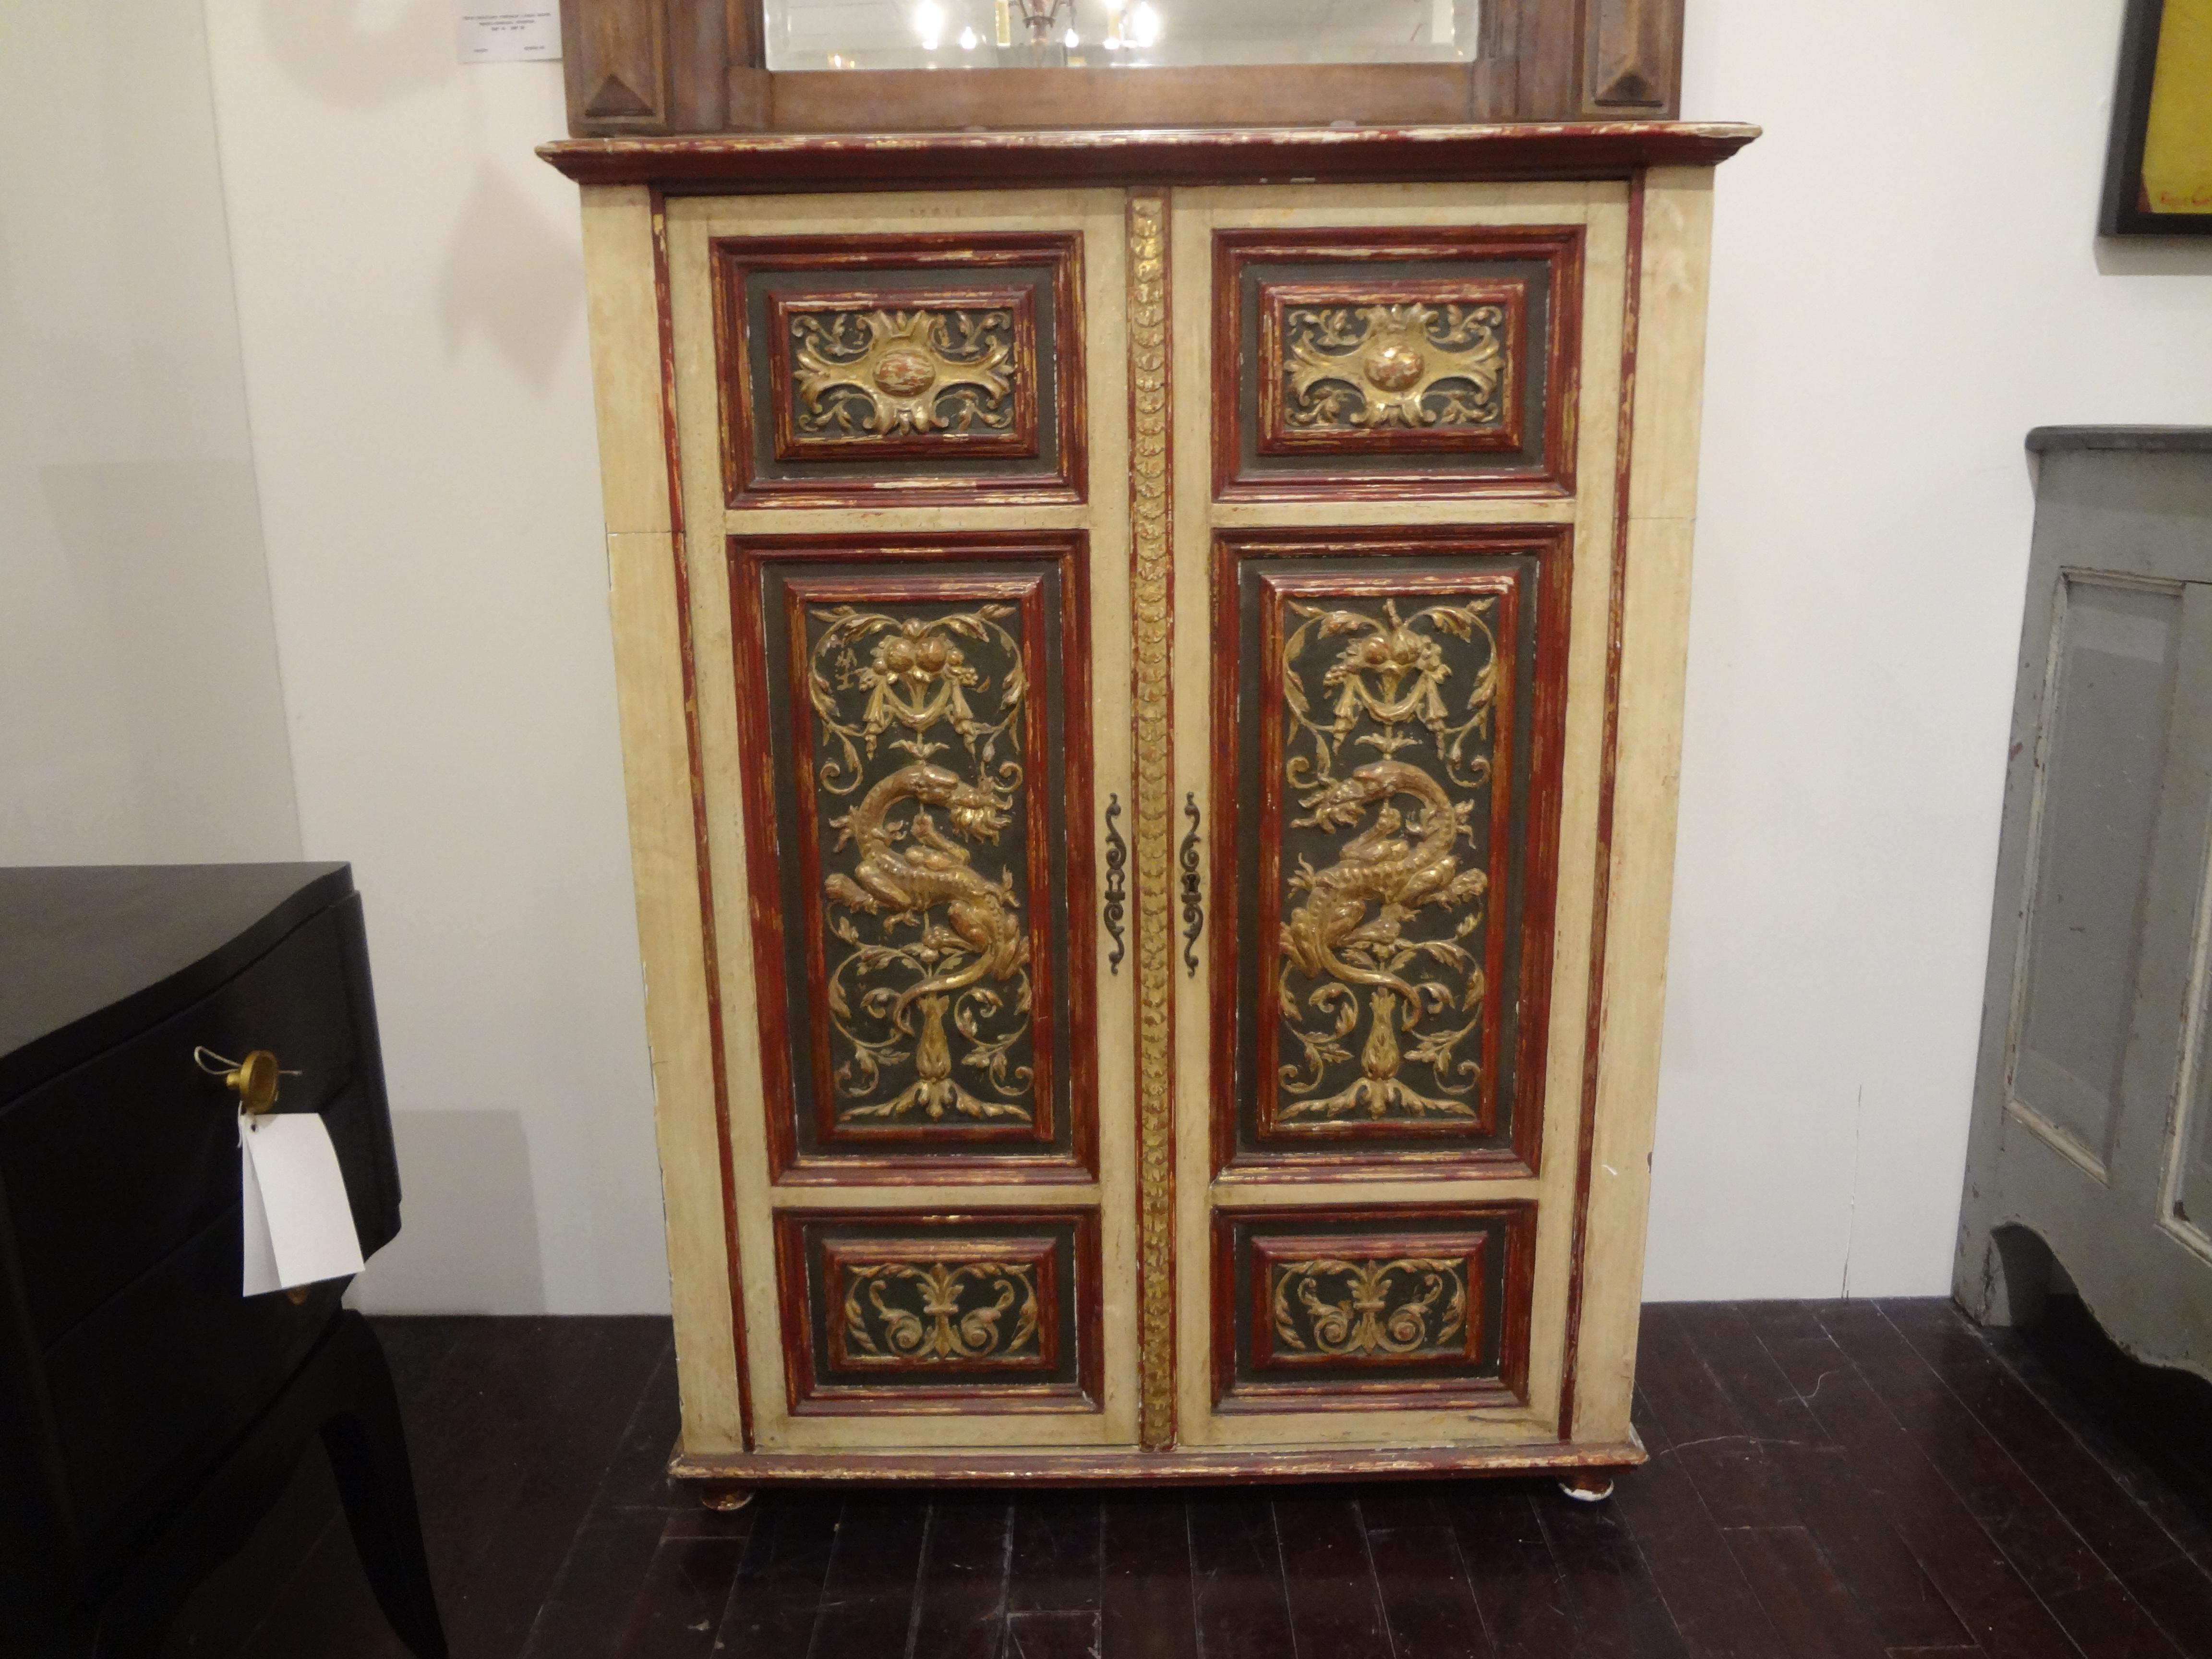 Italian painted and giltwood chinoiserie cabinet.
Stunning versatile Italian painted and gilt wood chinoiserie 2-door cabinet, bookcase, bar or cupboard resting on bun feet. This gorgeous Italian giltwood storage cabinet dates to 1920. Our